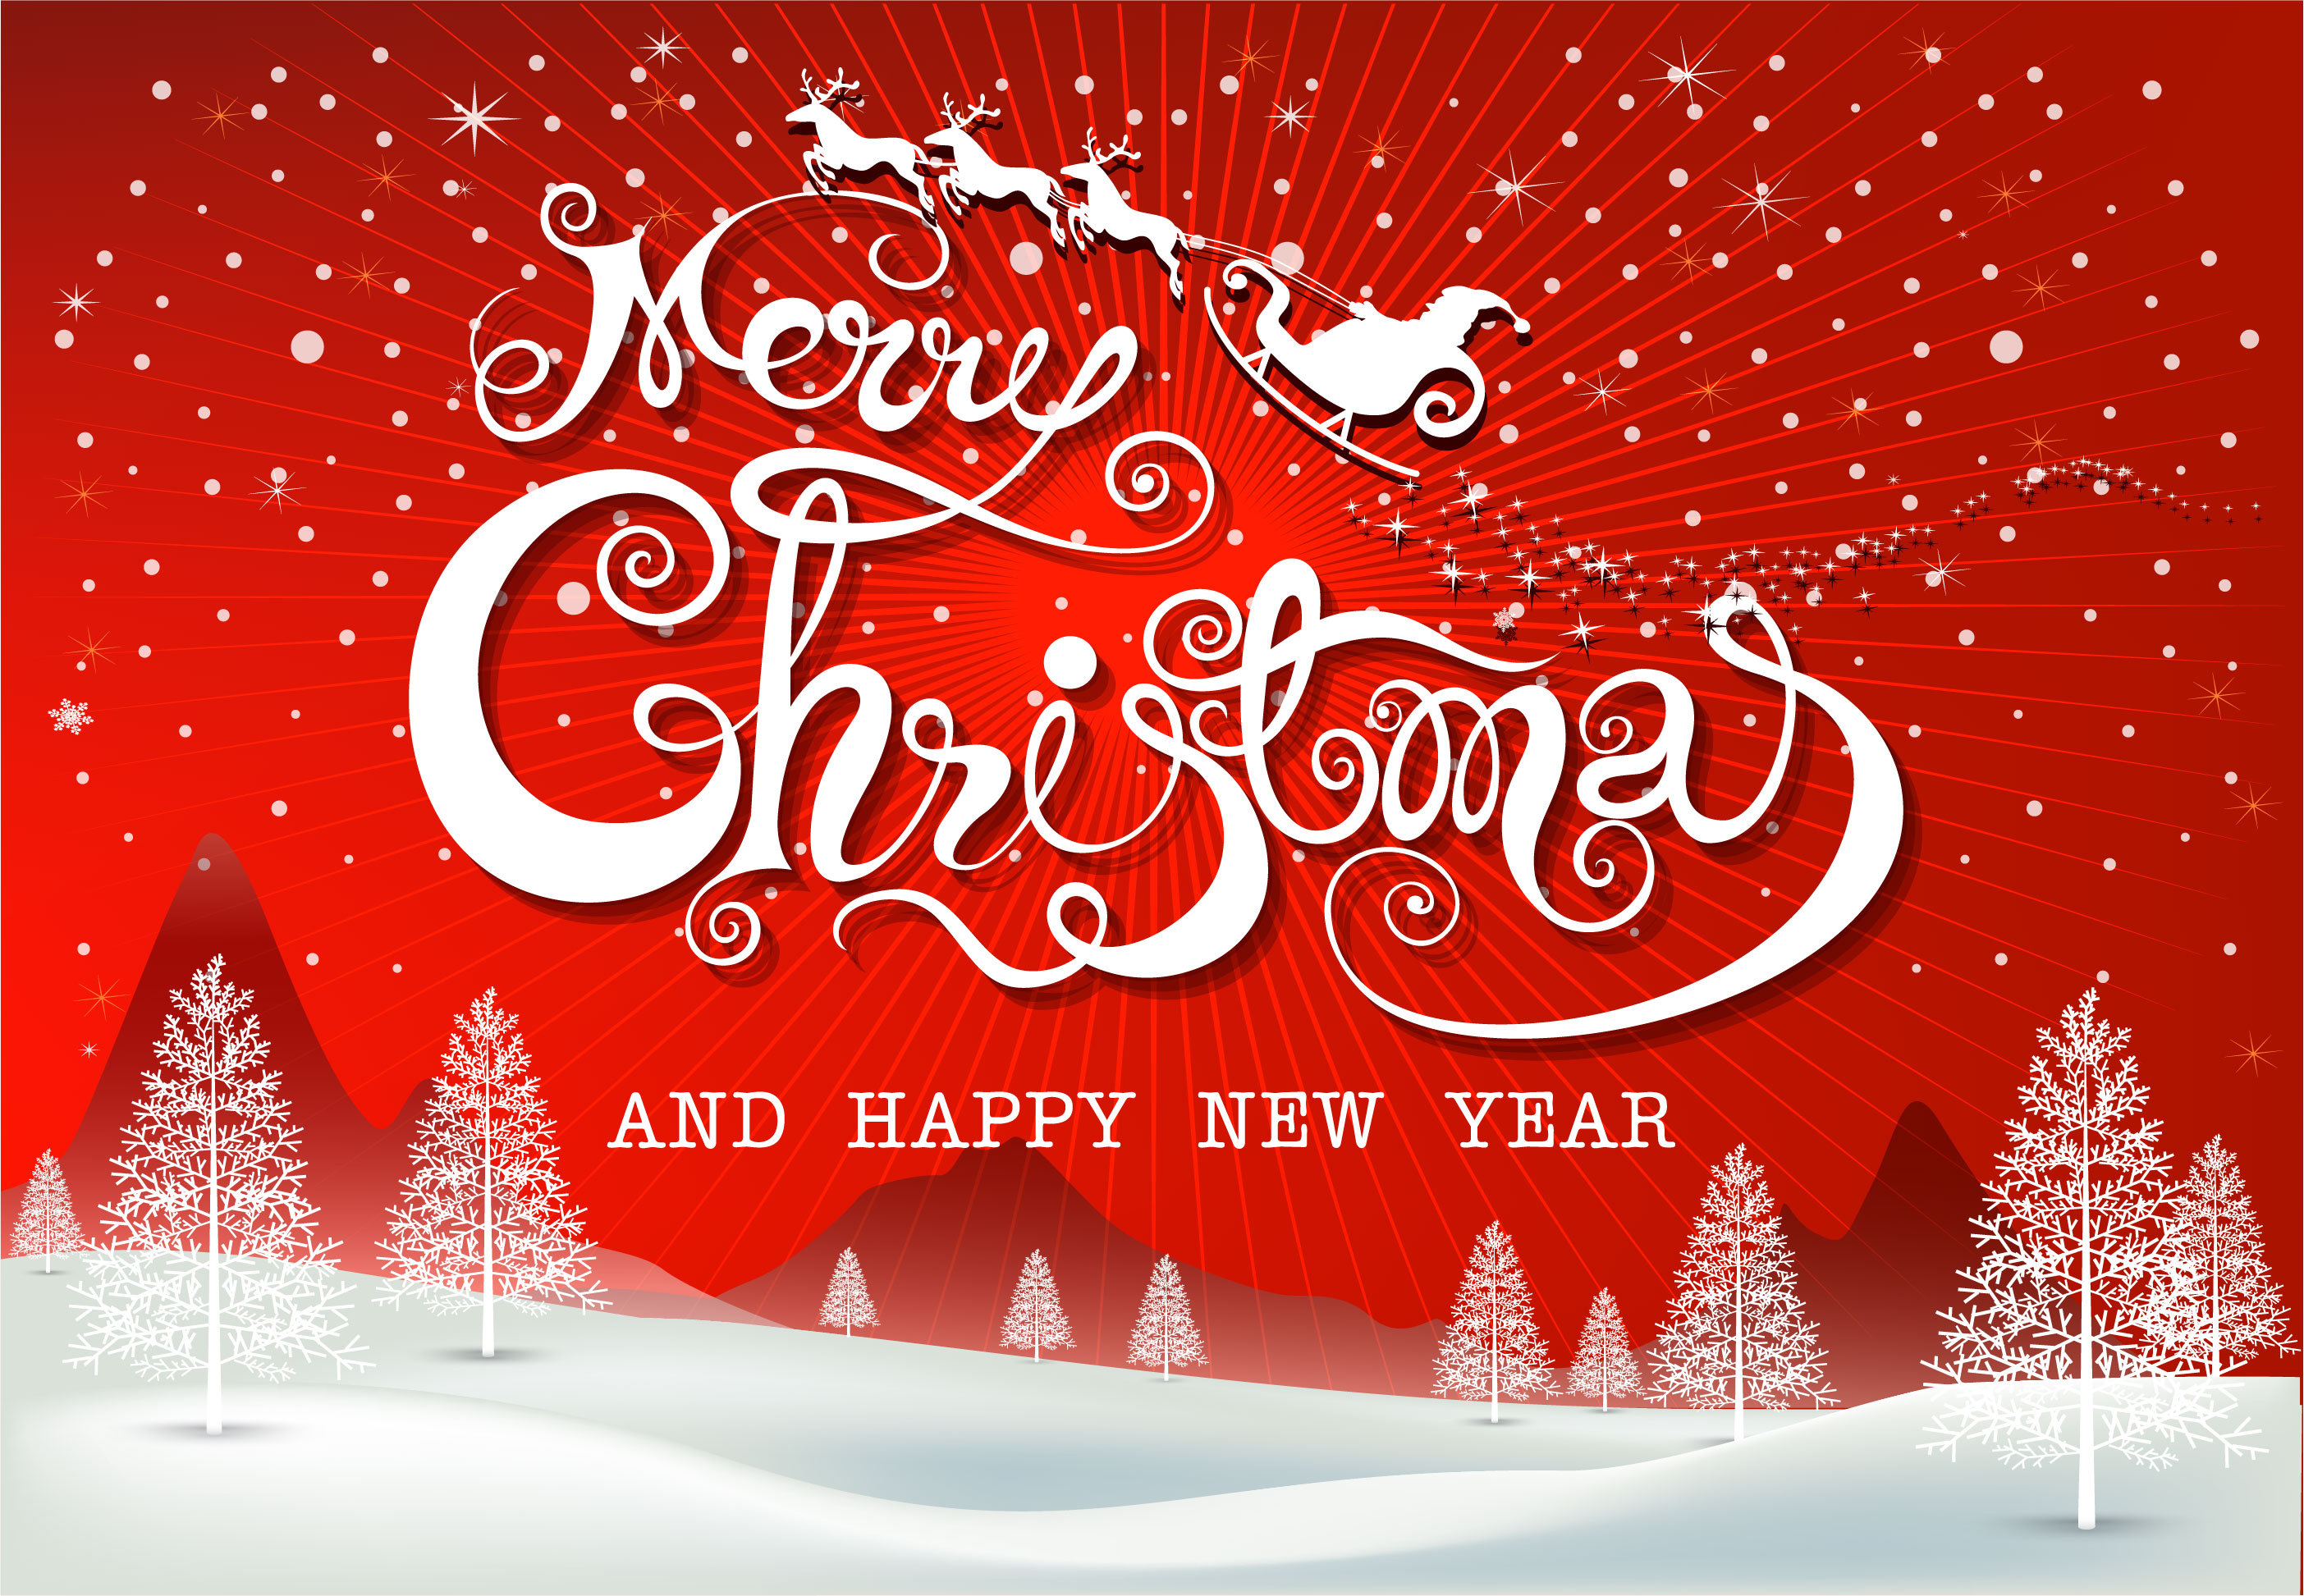 Happy Christmas Images Wishes And Quotes